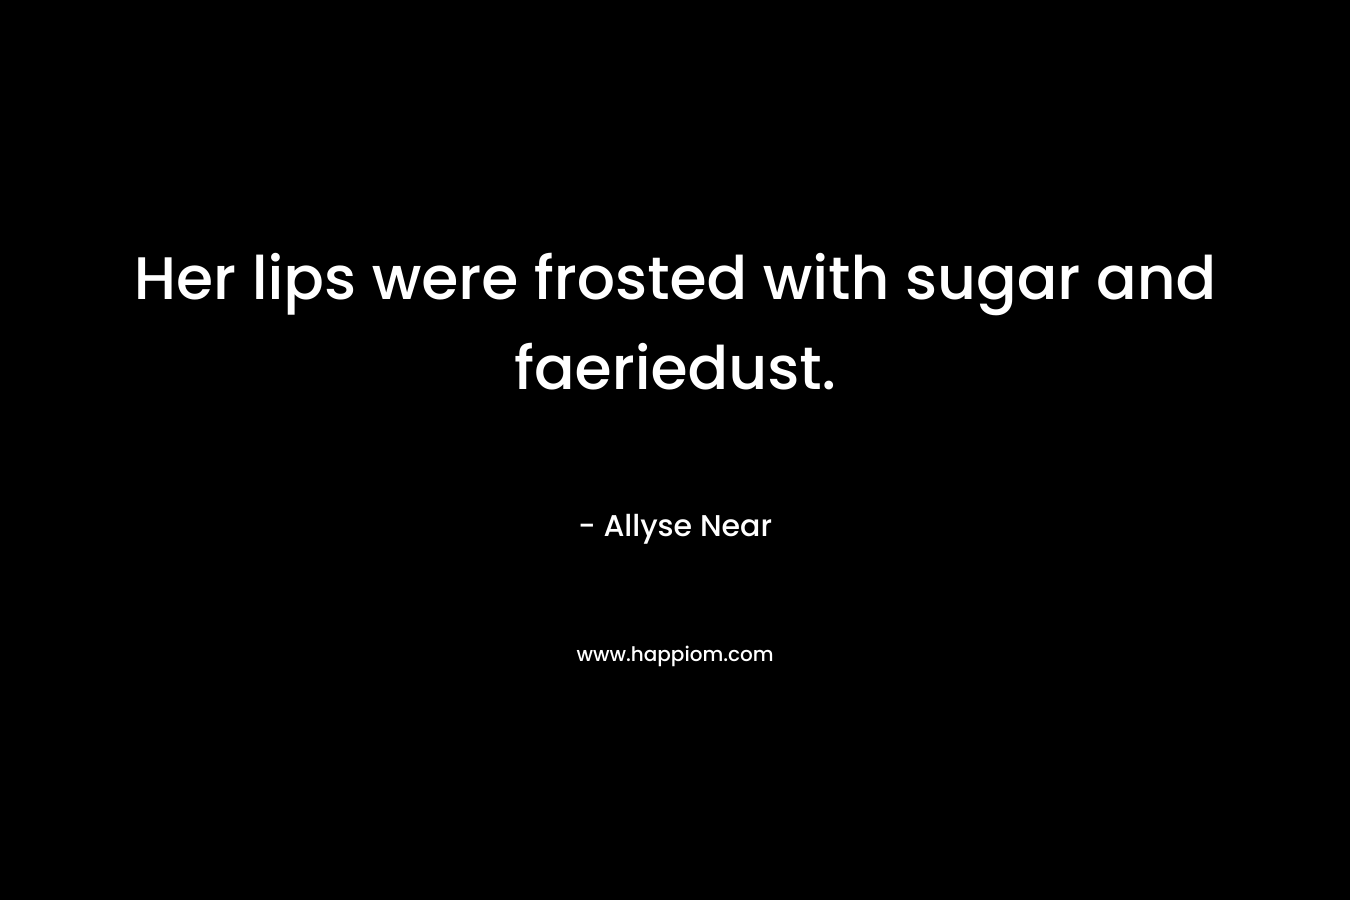 Her lips were frosted with sugar and faeriedust. – Allyse Near